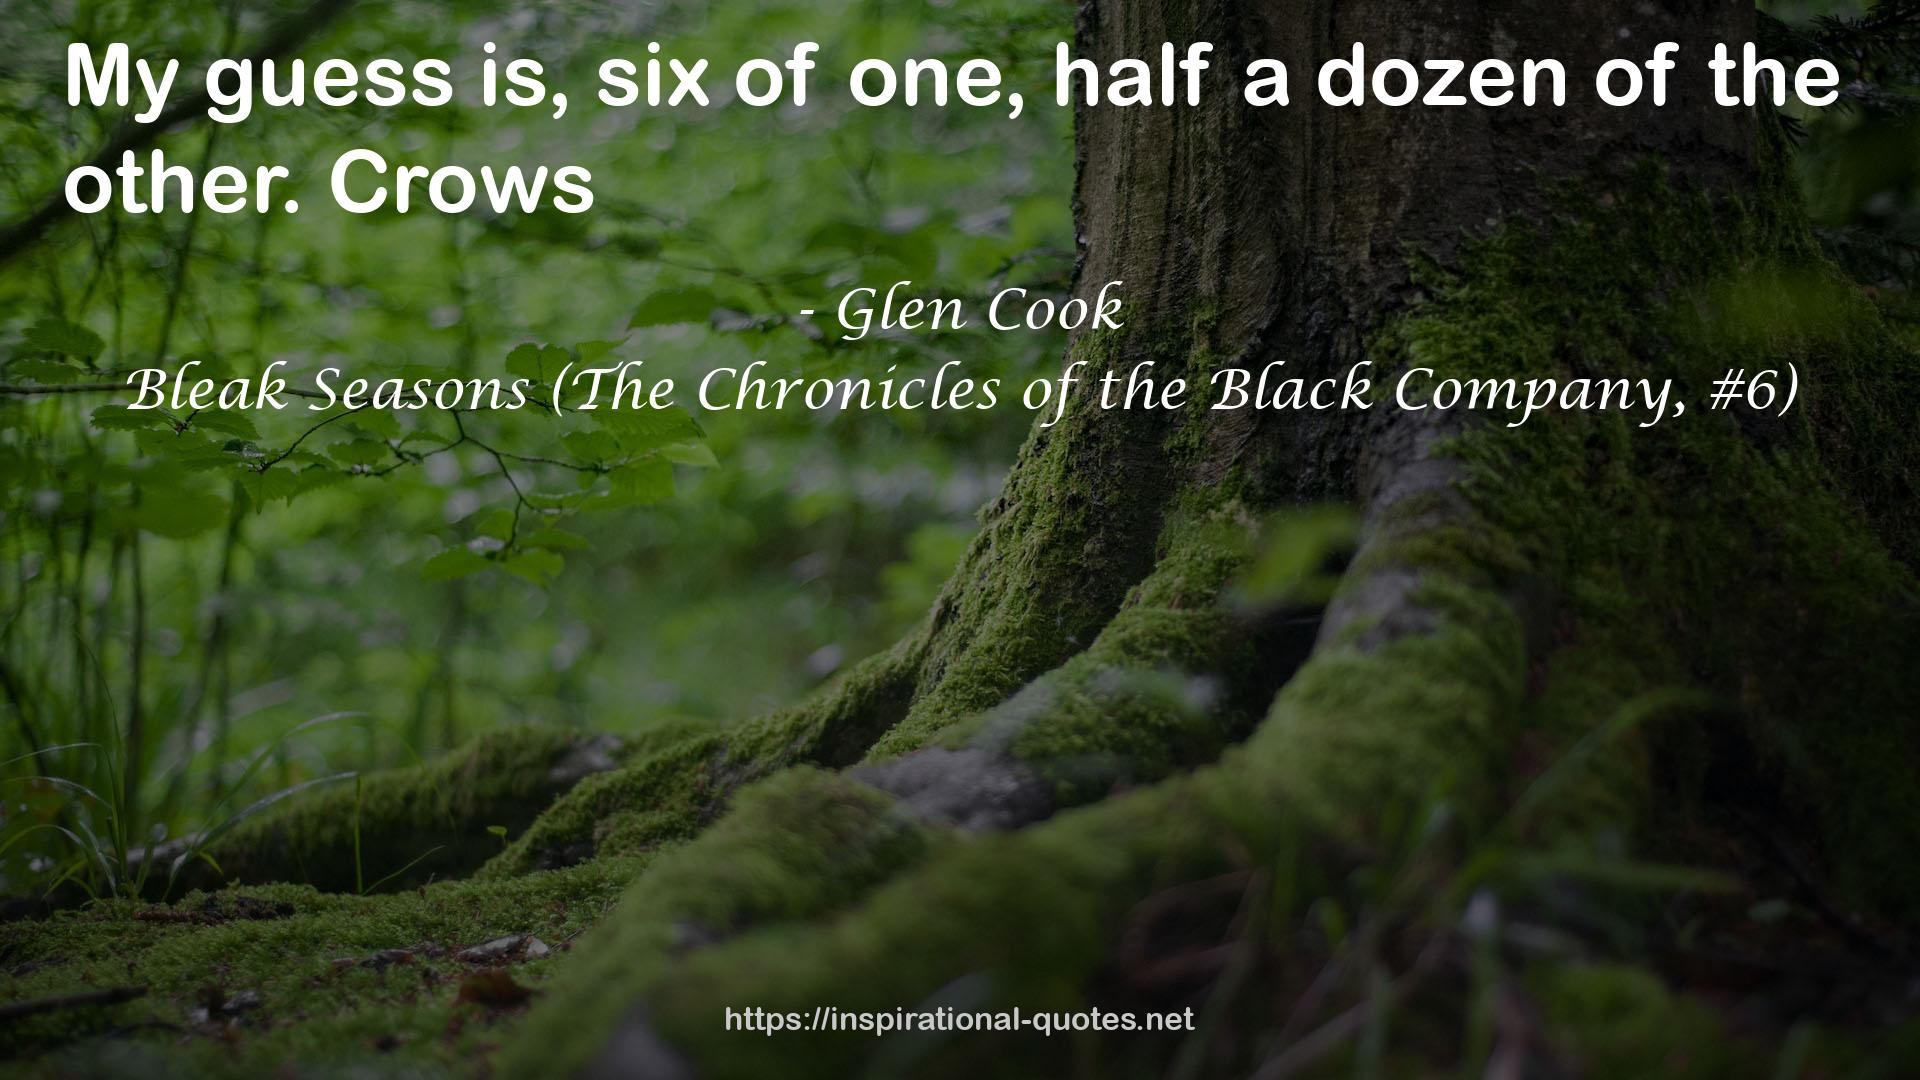 Bleak Seasons (The Chronicles of the Black Company, #6) QUOTES